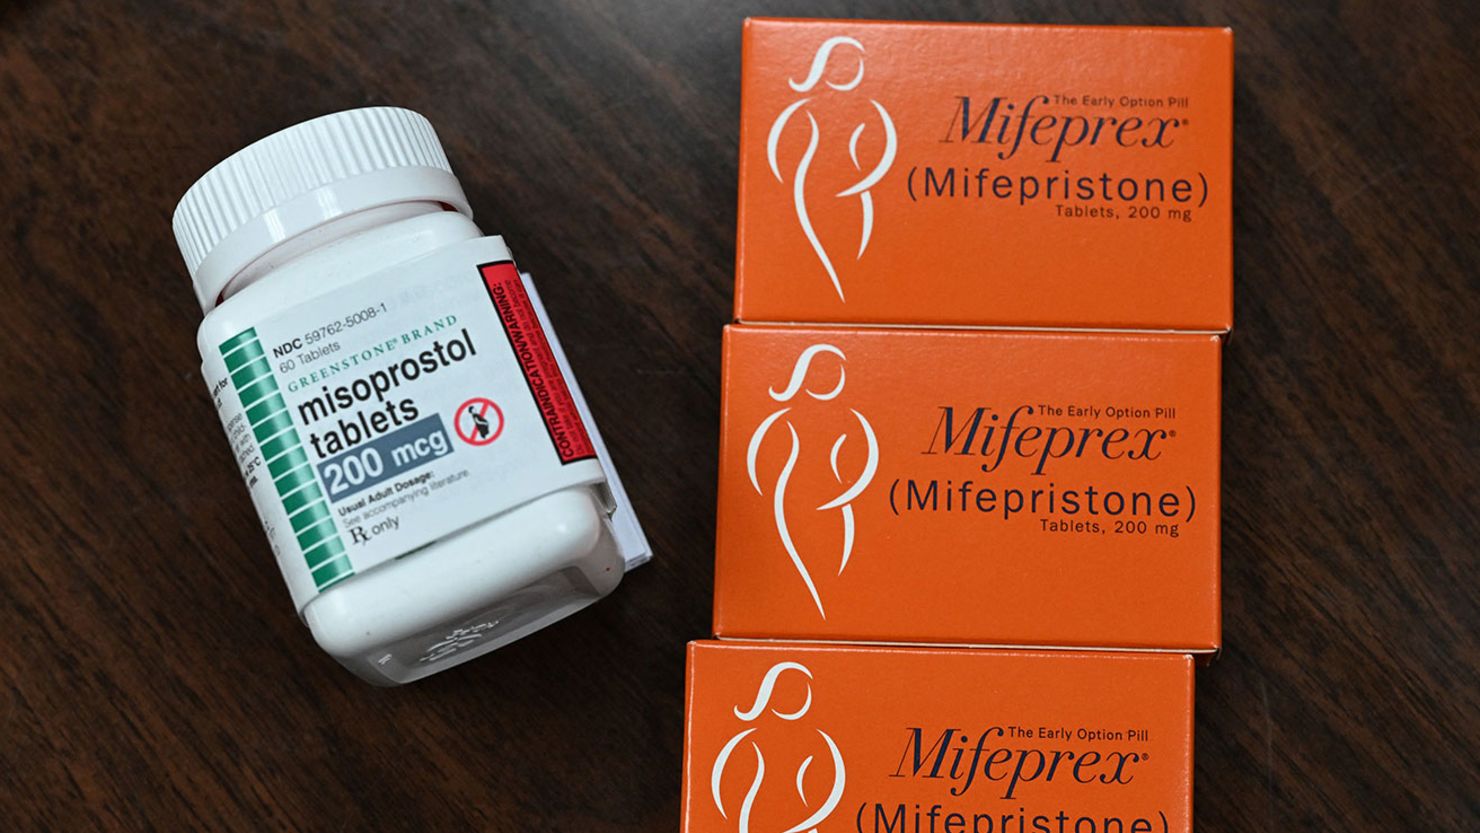 Medication abortion has become a more population option than ever as the total number of abortions in the US topped 1 million for the first time in more than a decade, according to two new reports.